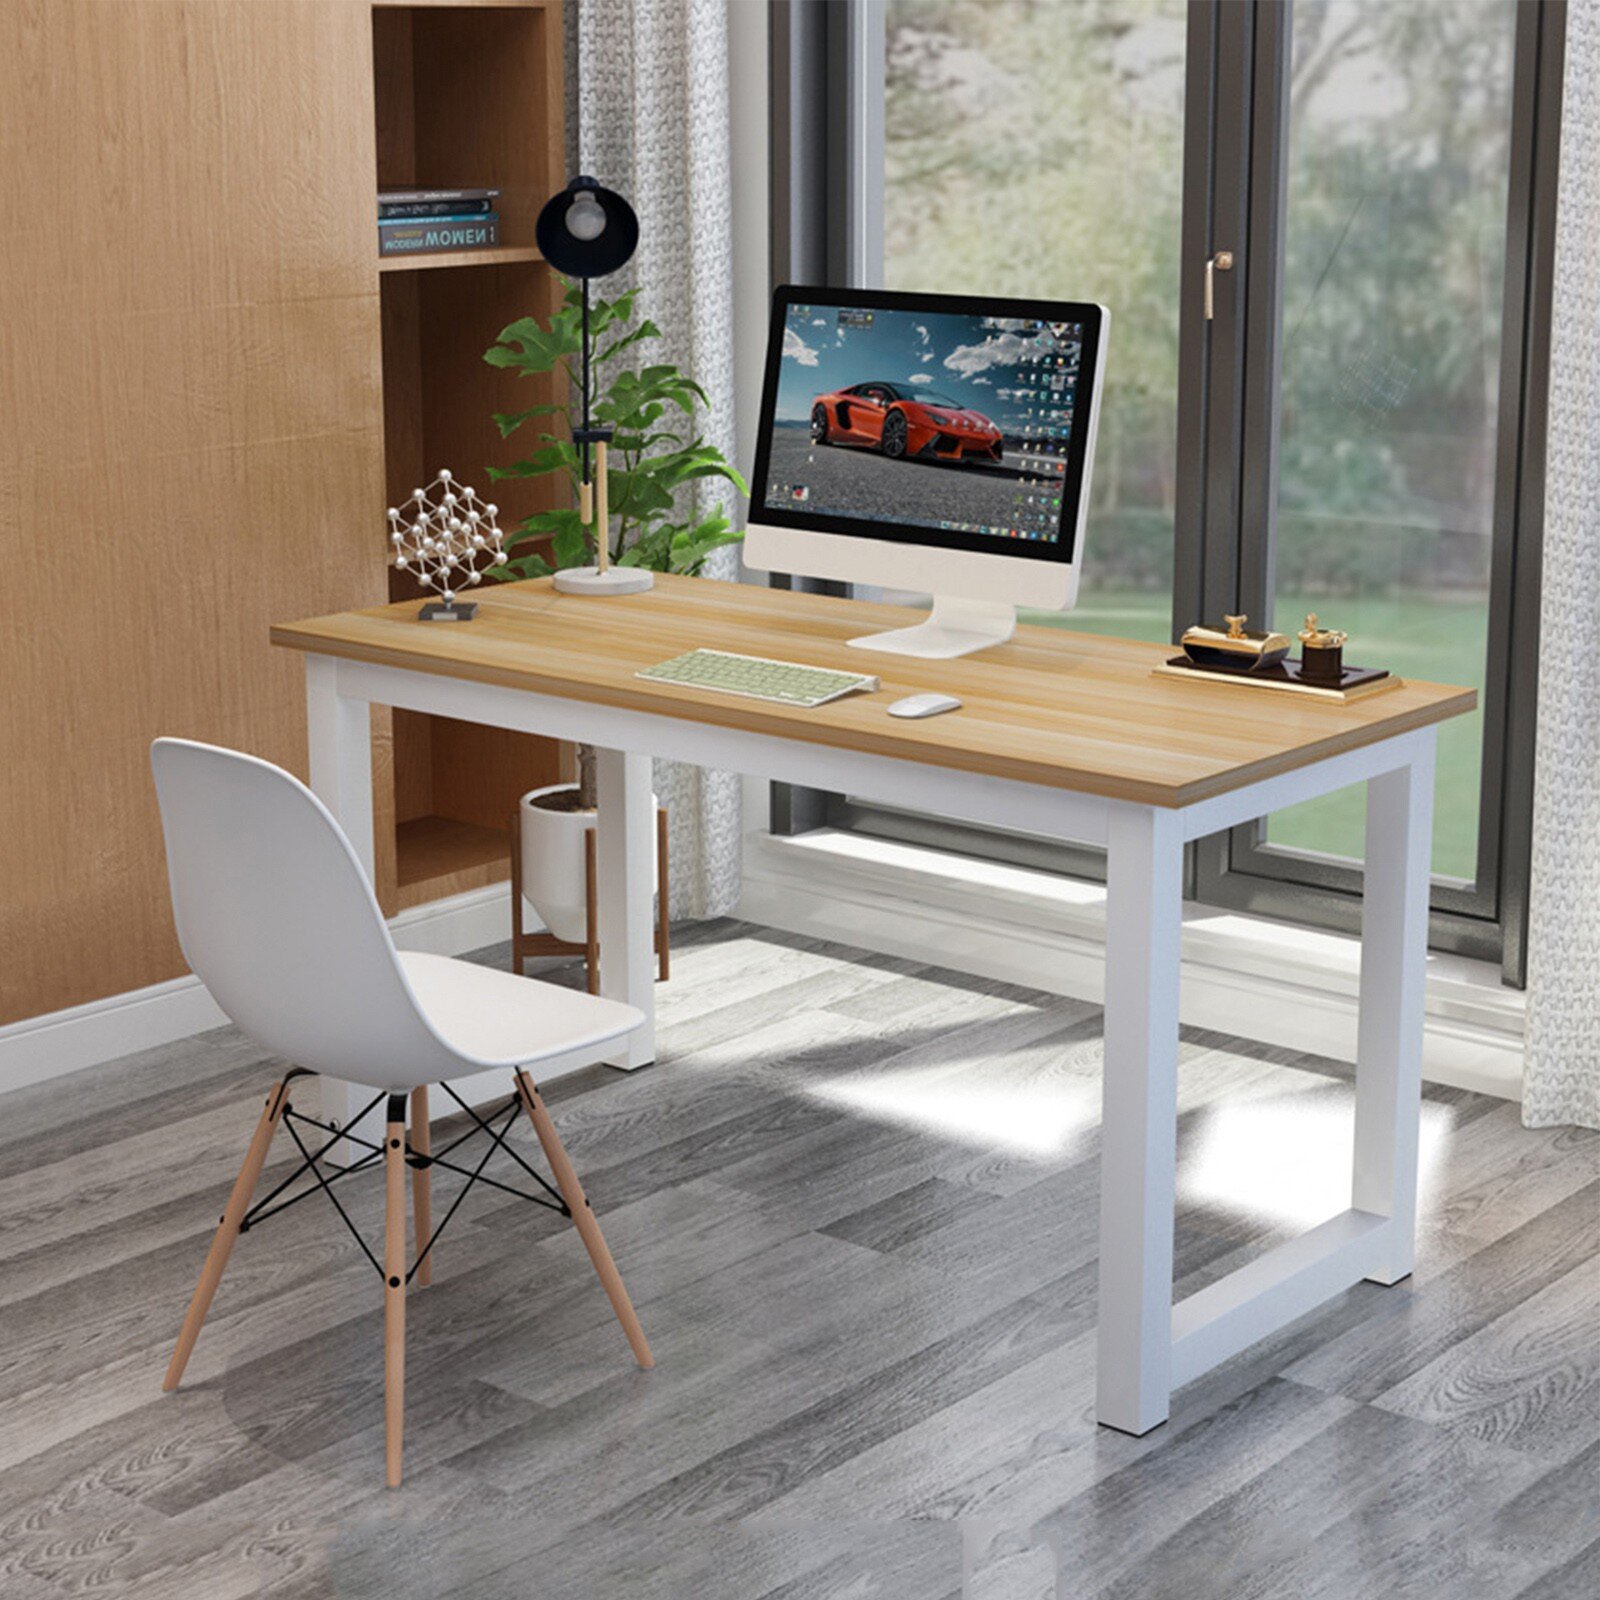 Computer PC Laptop Desk Study Table Workstation for Home Office and More Dripex Modern Simple Style Steel Frame Wooden Home Office Table Light-Beech